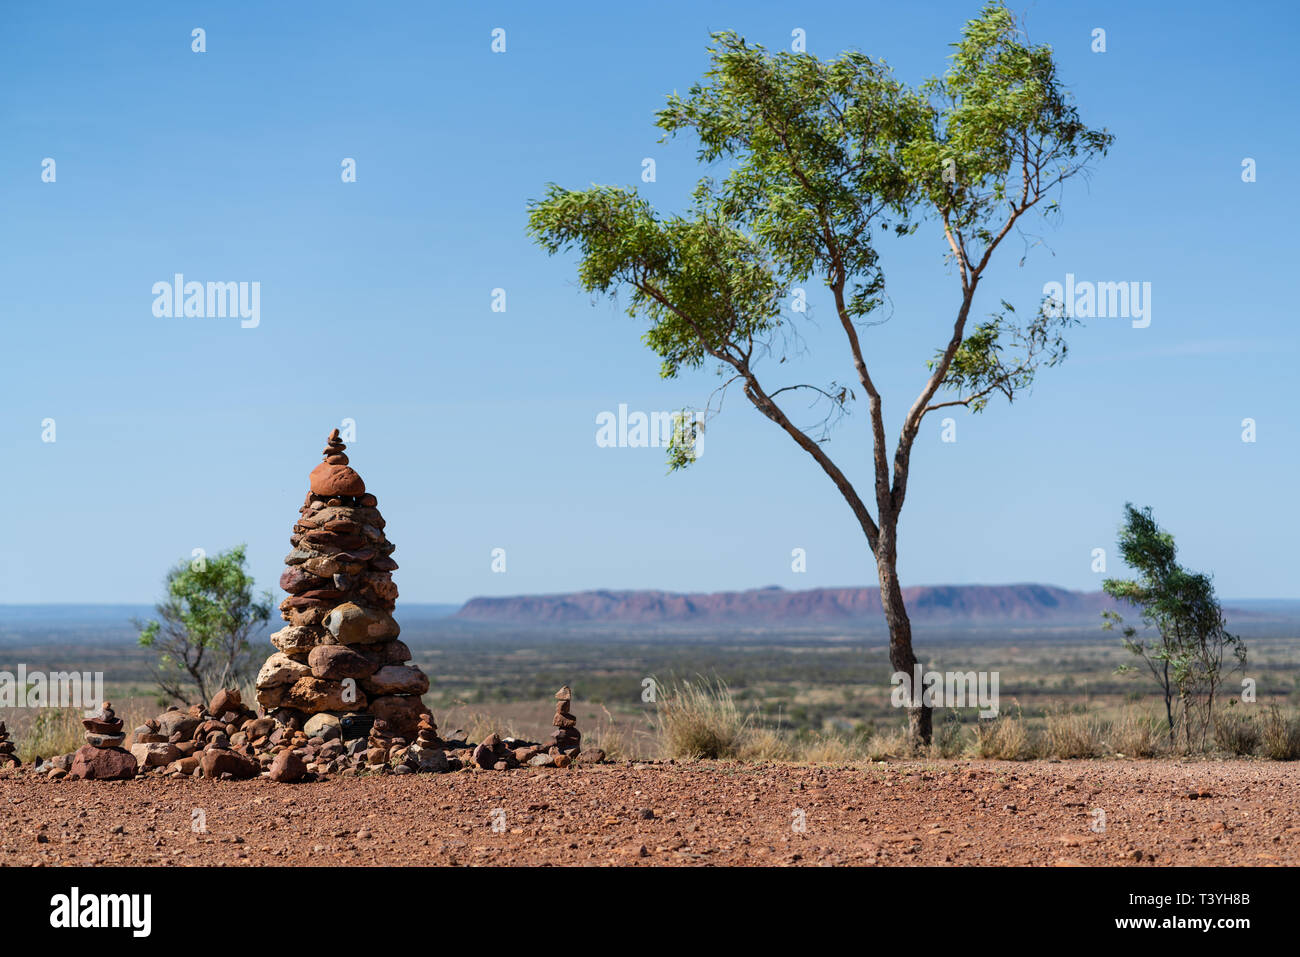 Cairn and gum tree with outback landscape in background in NT outback Australia Stock Photo